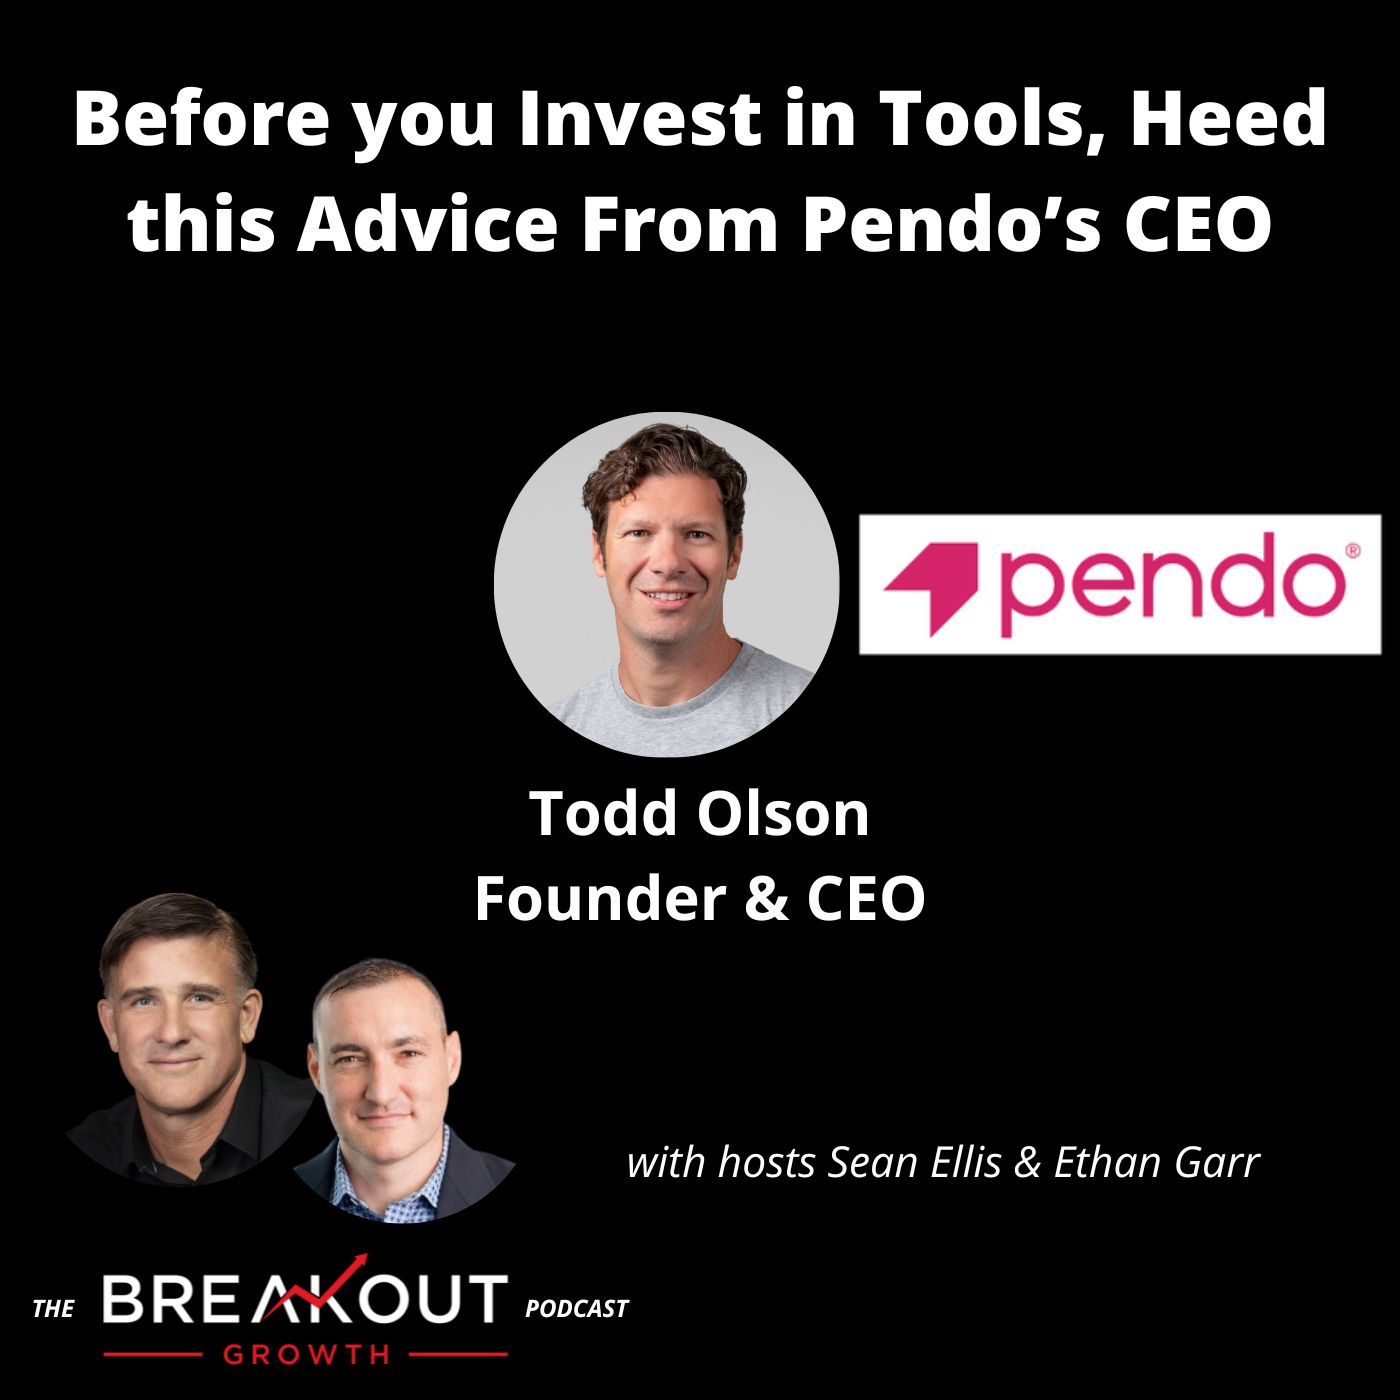 Before you Invest in Tools, Heed this Advice From Pendo’s CEO